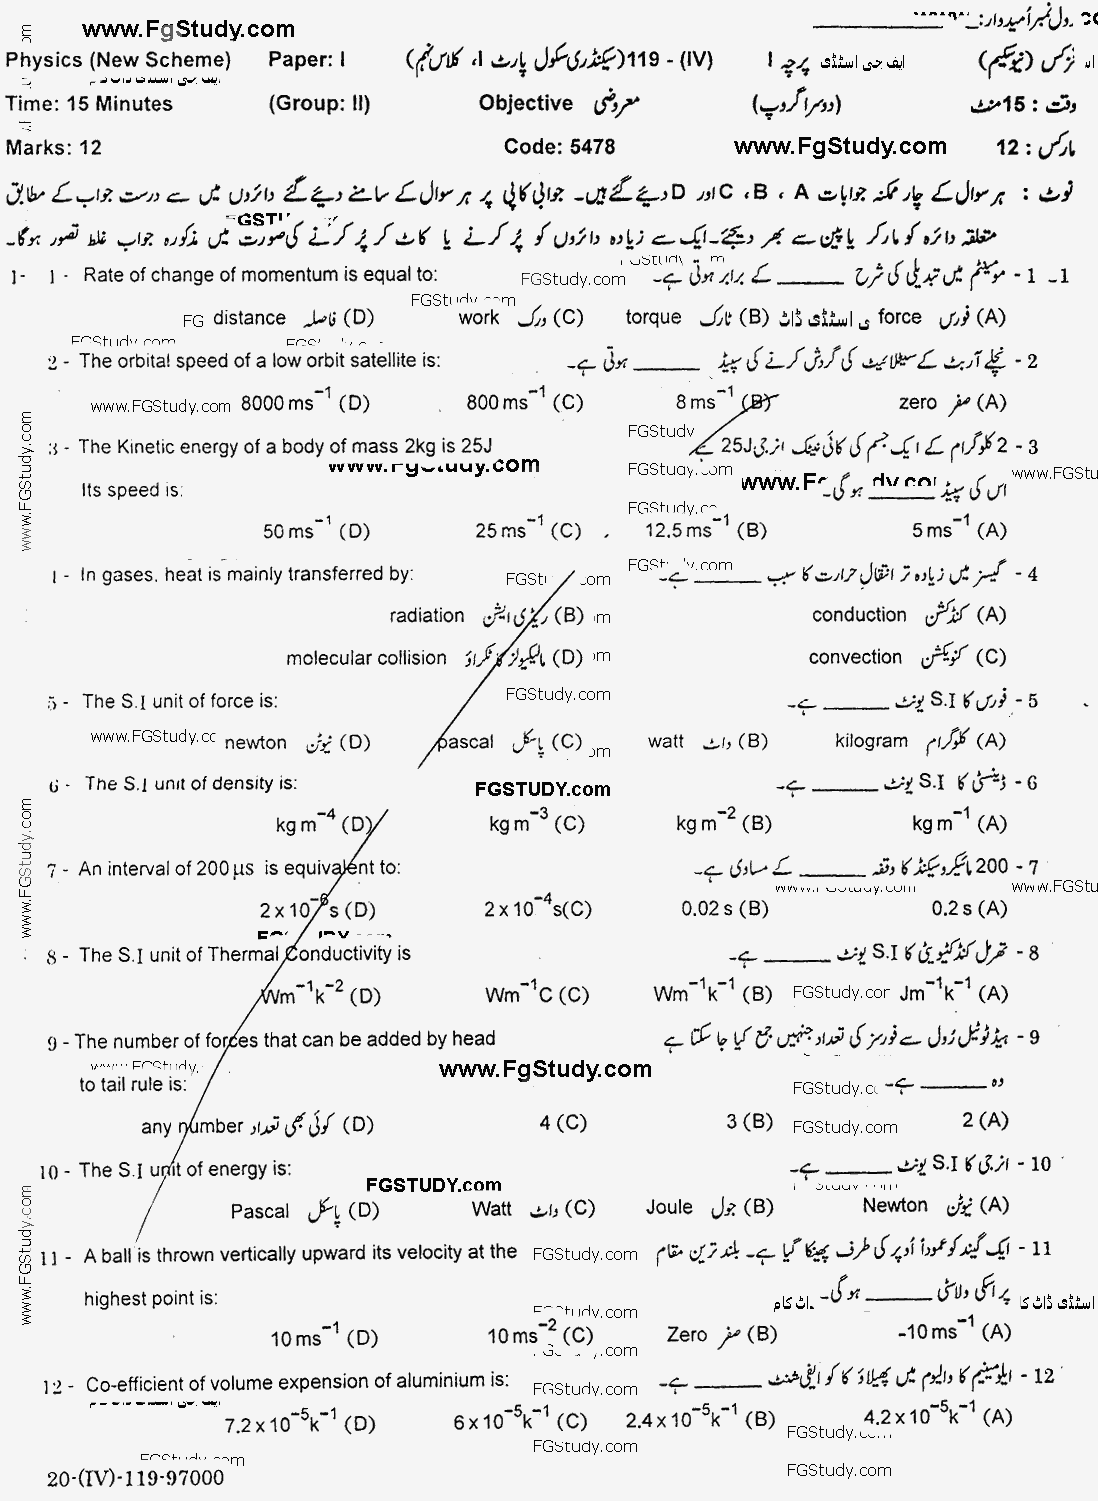 Gujranwala Board Physics Objective Group 2 9th Class Past Papers 2019